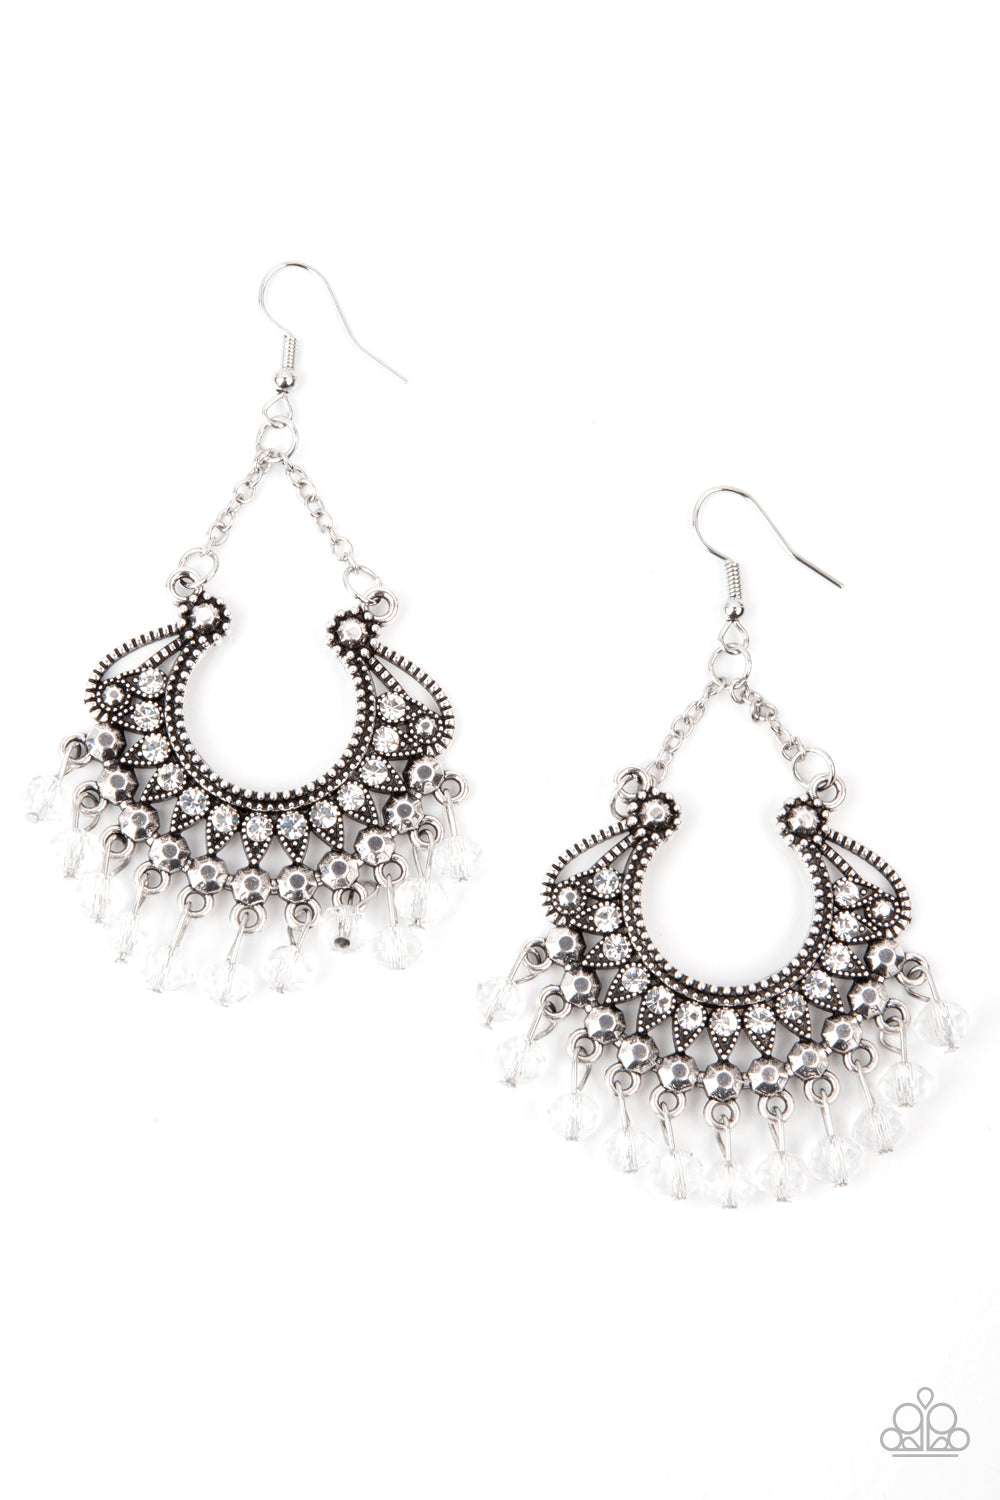 White rhinestone dotted petals fan out into a studded scalloped frame. Glittery white crystal-like beads swing from the bottom of a decorative silver frame, creating a glamorous fringe. Earring attaches to a standard fishhook fitting.